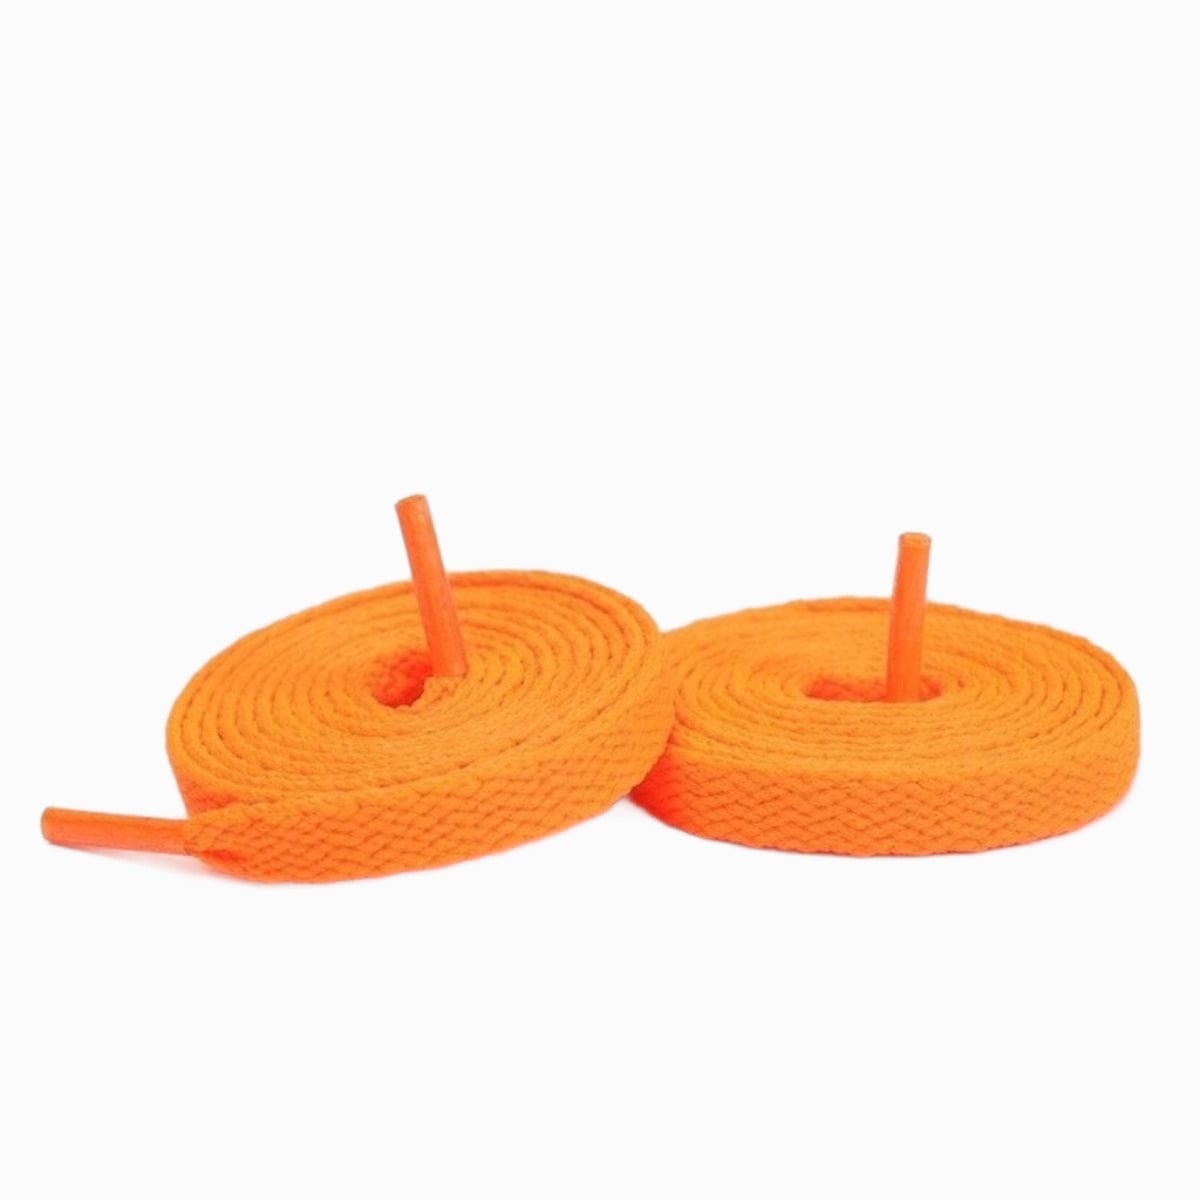 Orange Replacement Adidas Shoe Laces for Adidas Handball Spezial Sneakers by Kicks Shoelaces